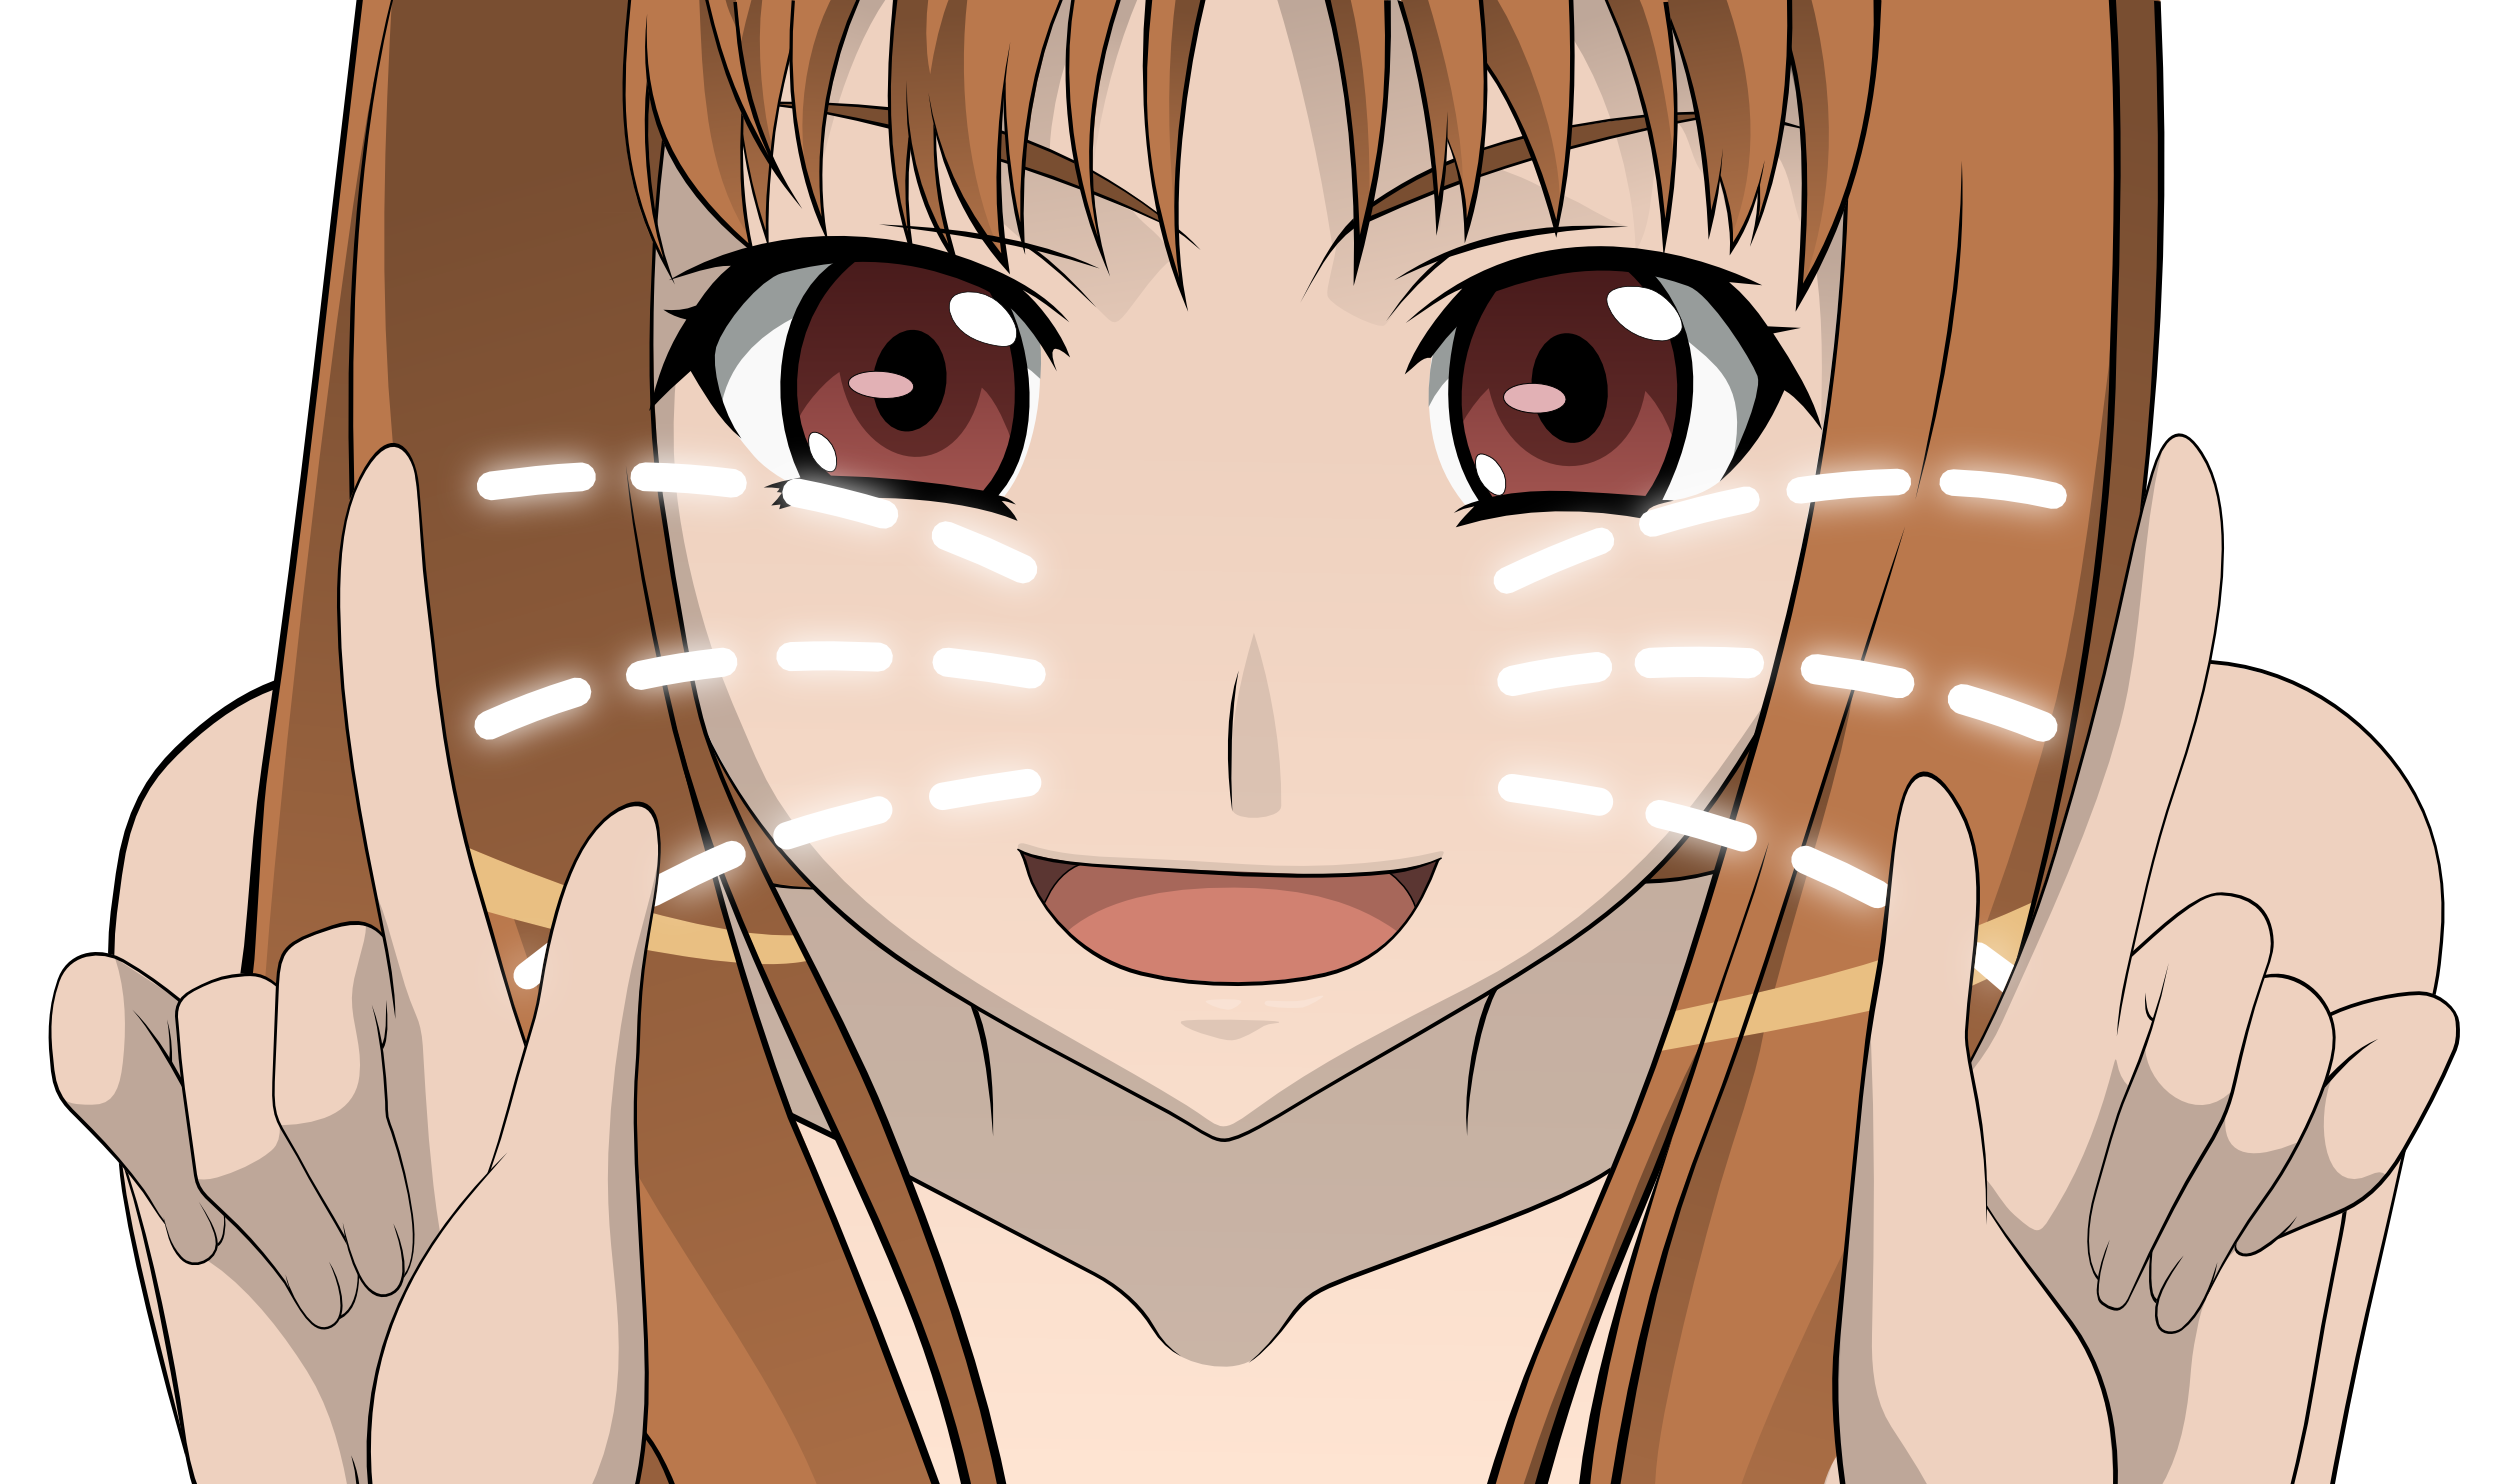 Spice and Wolf, long hair, transparent, red eyes, anime, Holo The Wise Wolf, anime vectors - desktop wallpaper